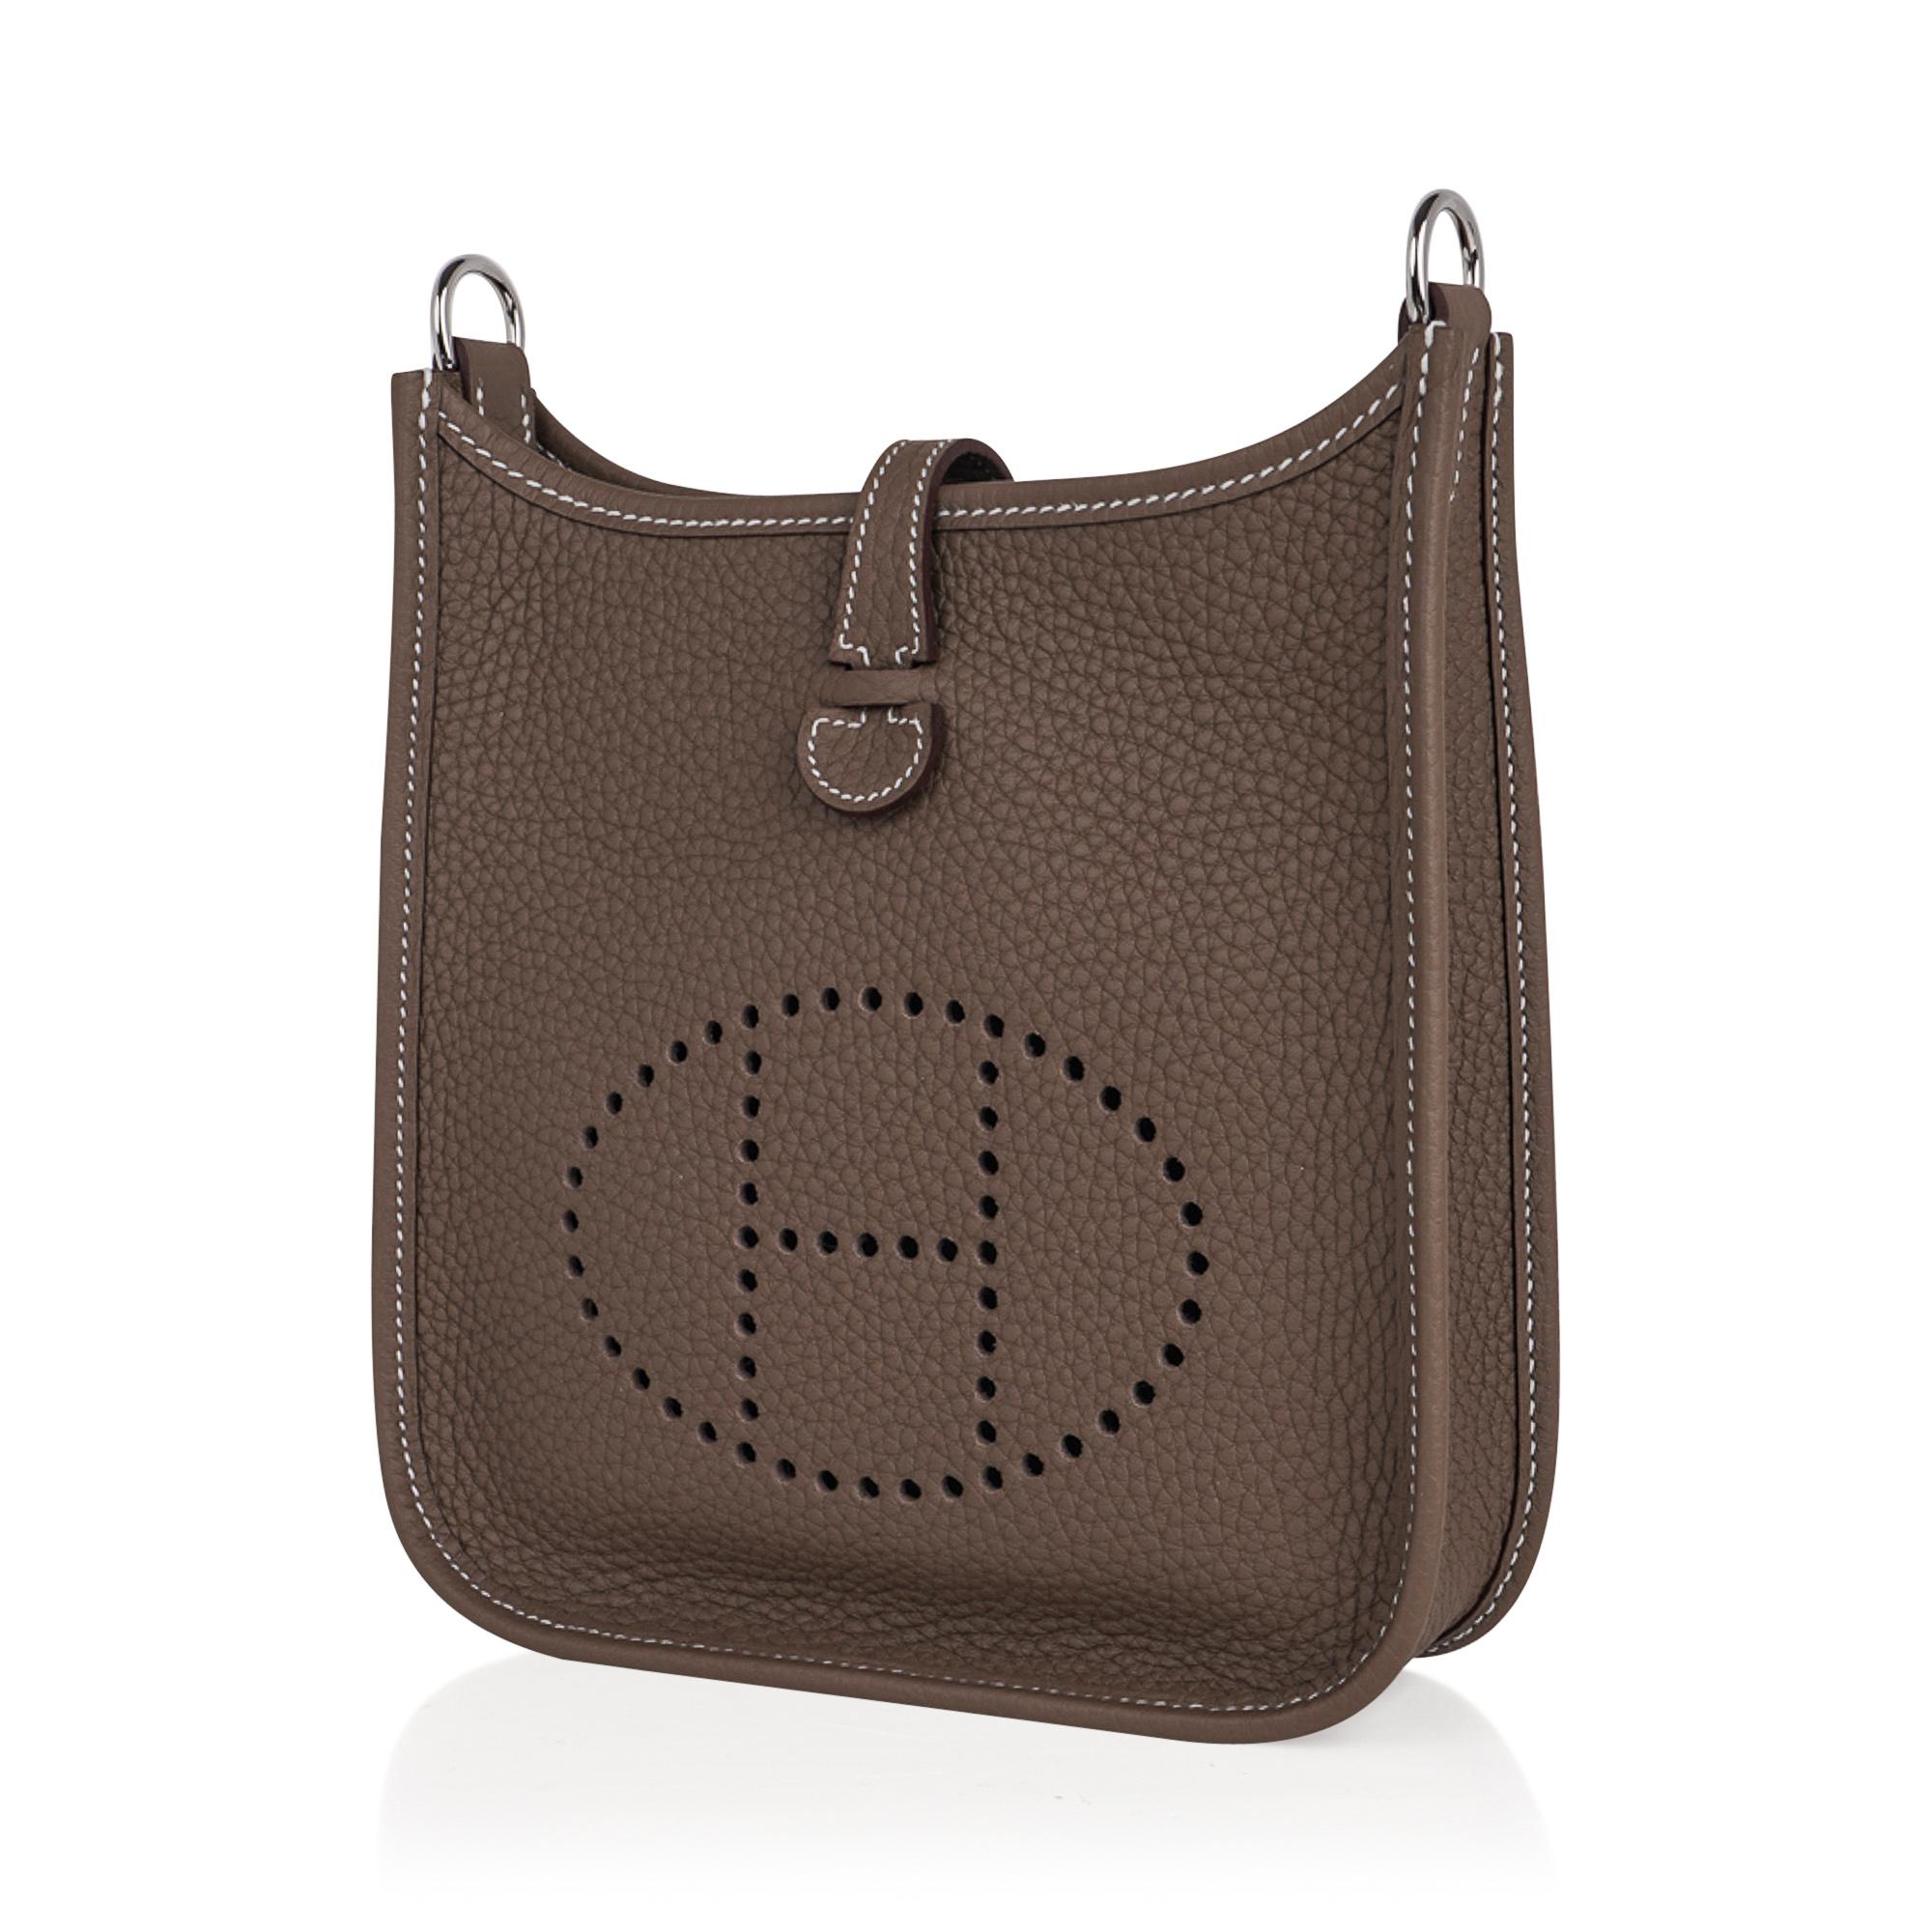 Mightychic offers an Hermes Evelyne TPM bag featured in neutral Etoupe.
Plush clemence leather and matching Etoupe canvas sport strap.
Signature perforated H on front of bag.
Fresh with palladium hardware.
Fabulous shoulder or crossbody bag. 
Sport